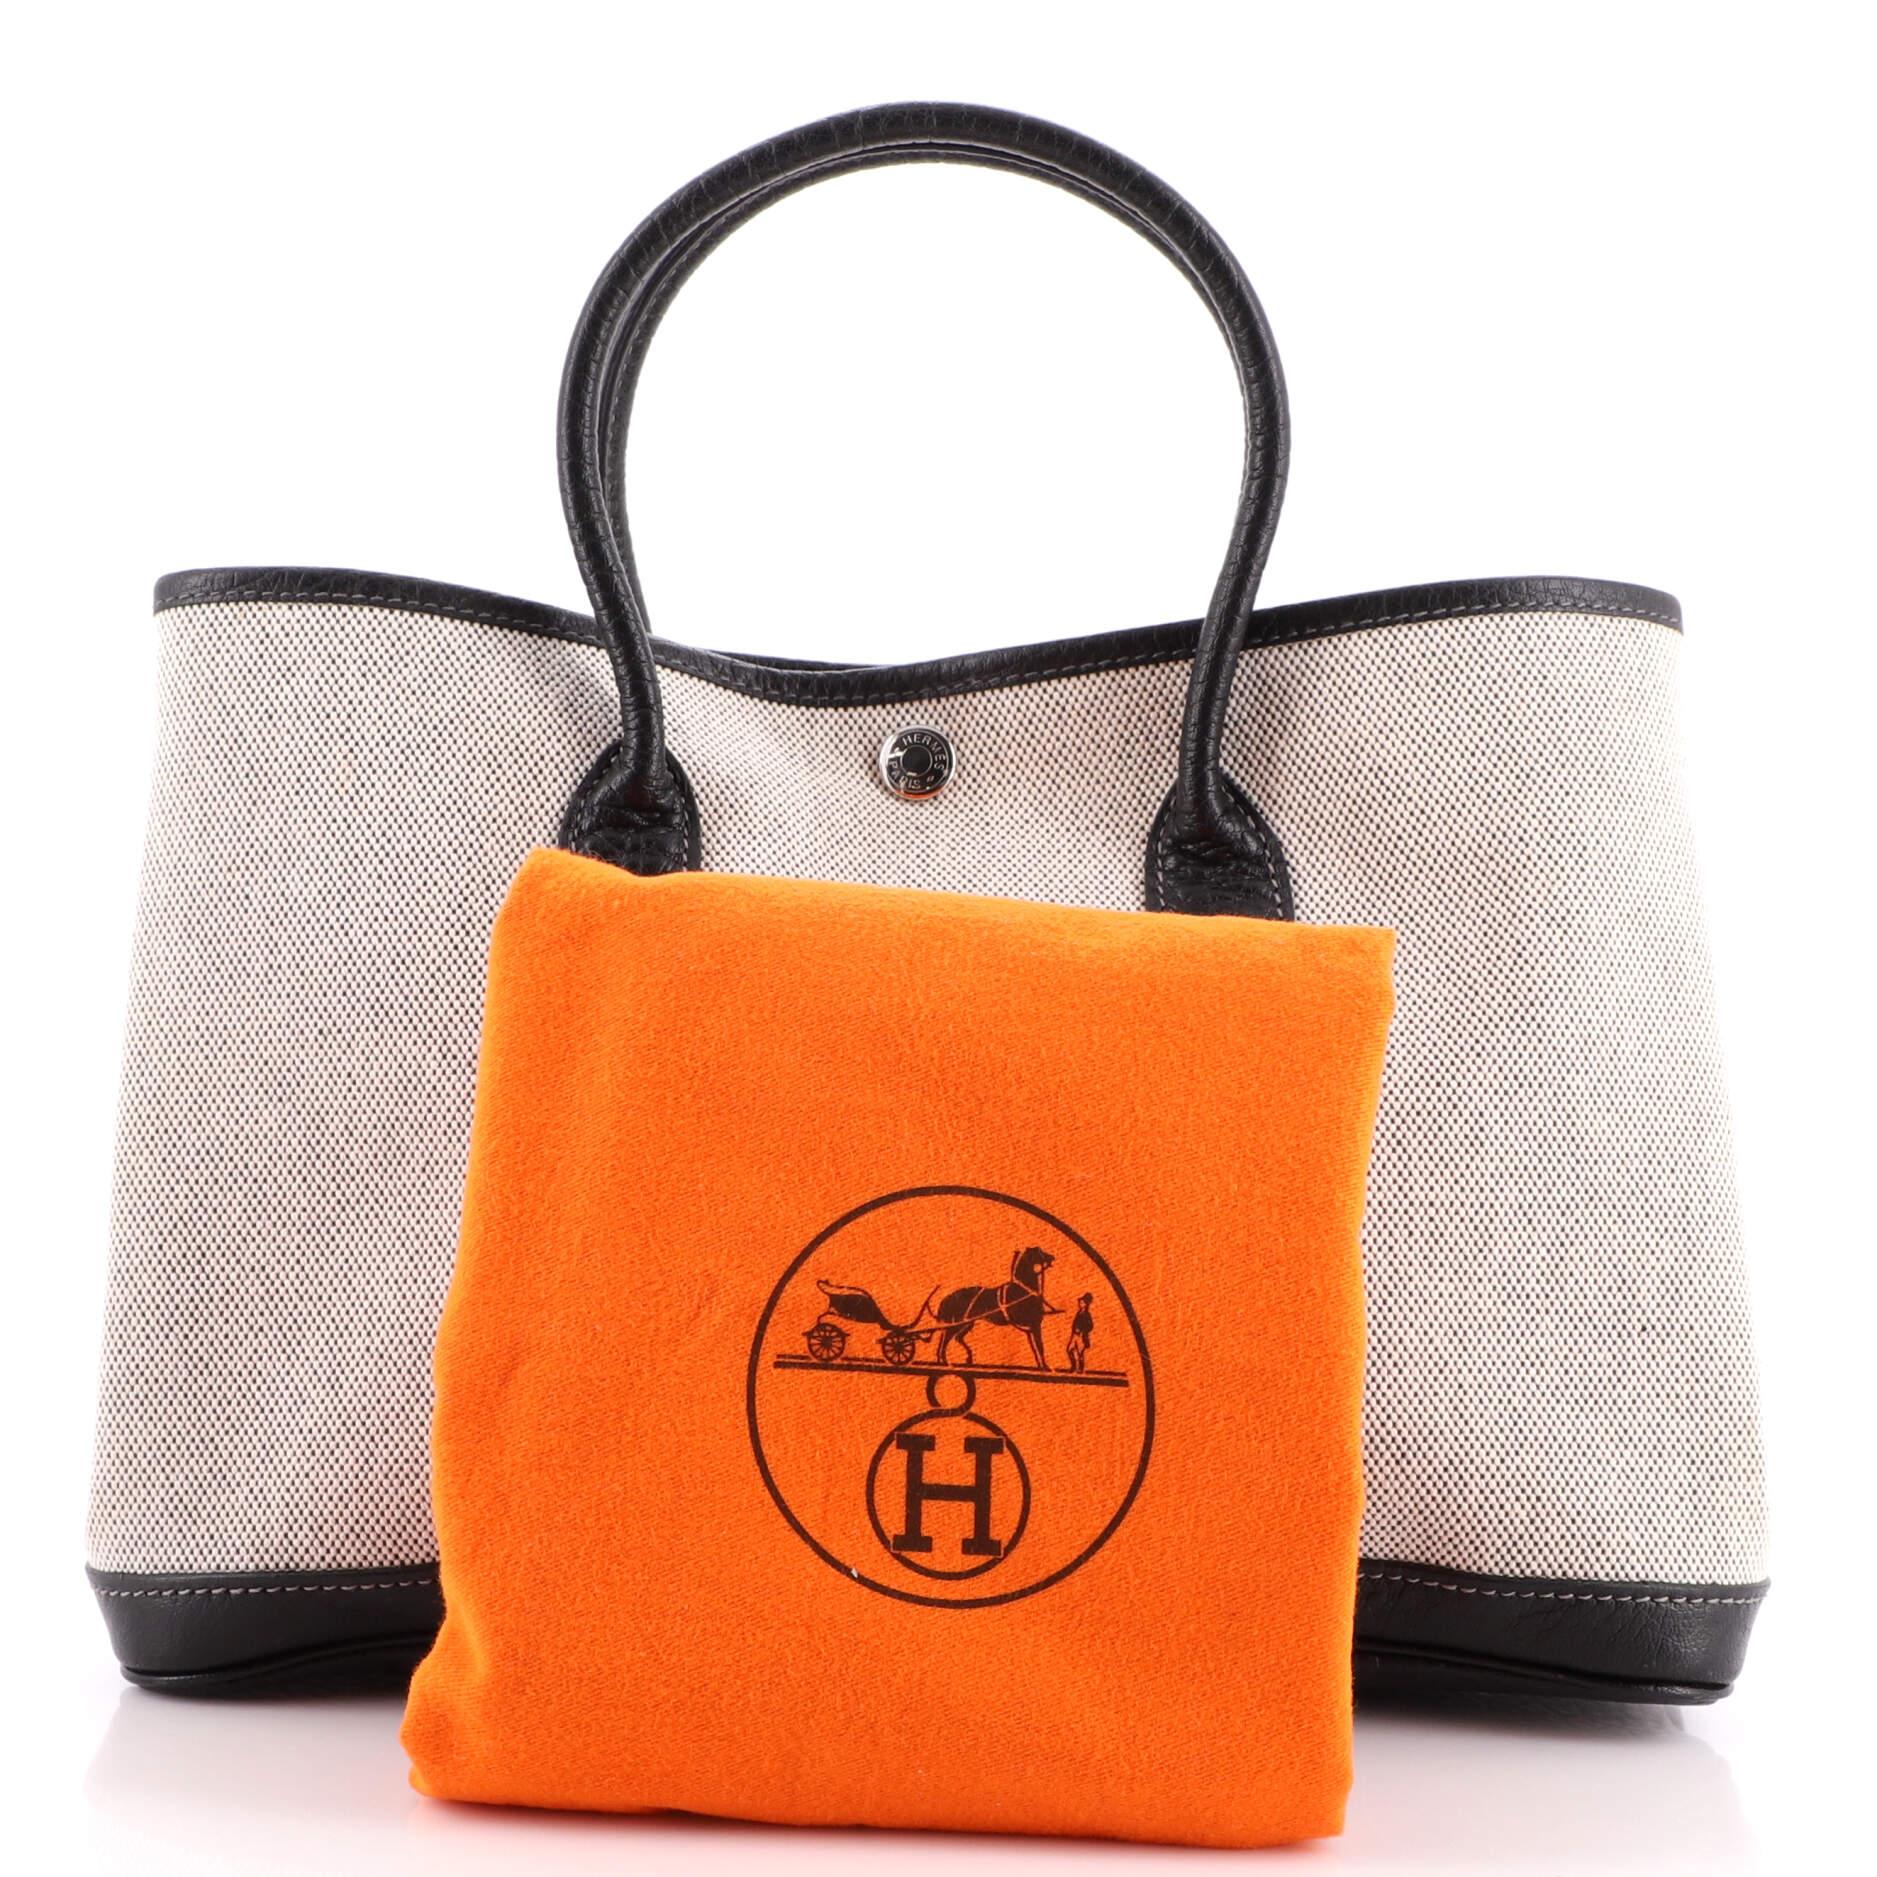 Hermes Garden Party 30, Sesame Canvas with Tan Leather, New in Box WA001